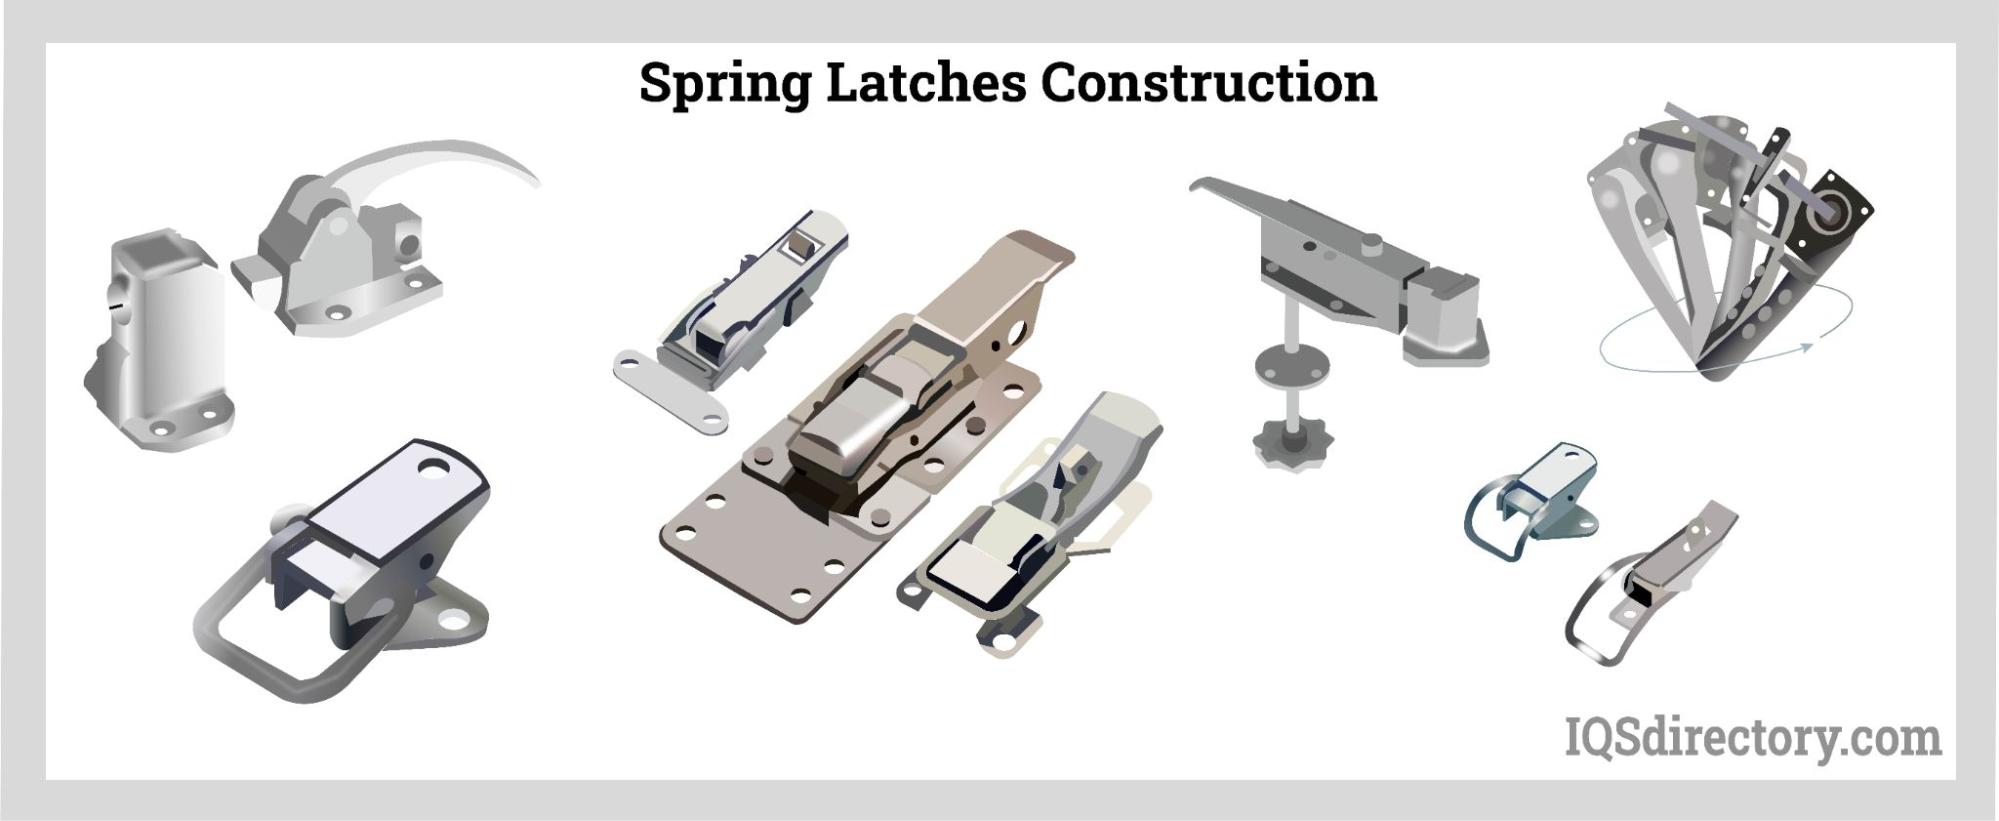  Spring Latches Construction